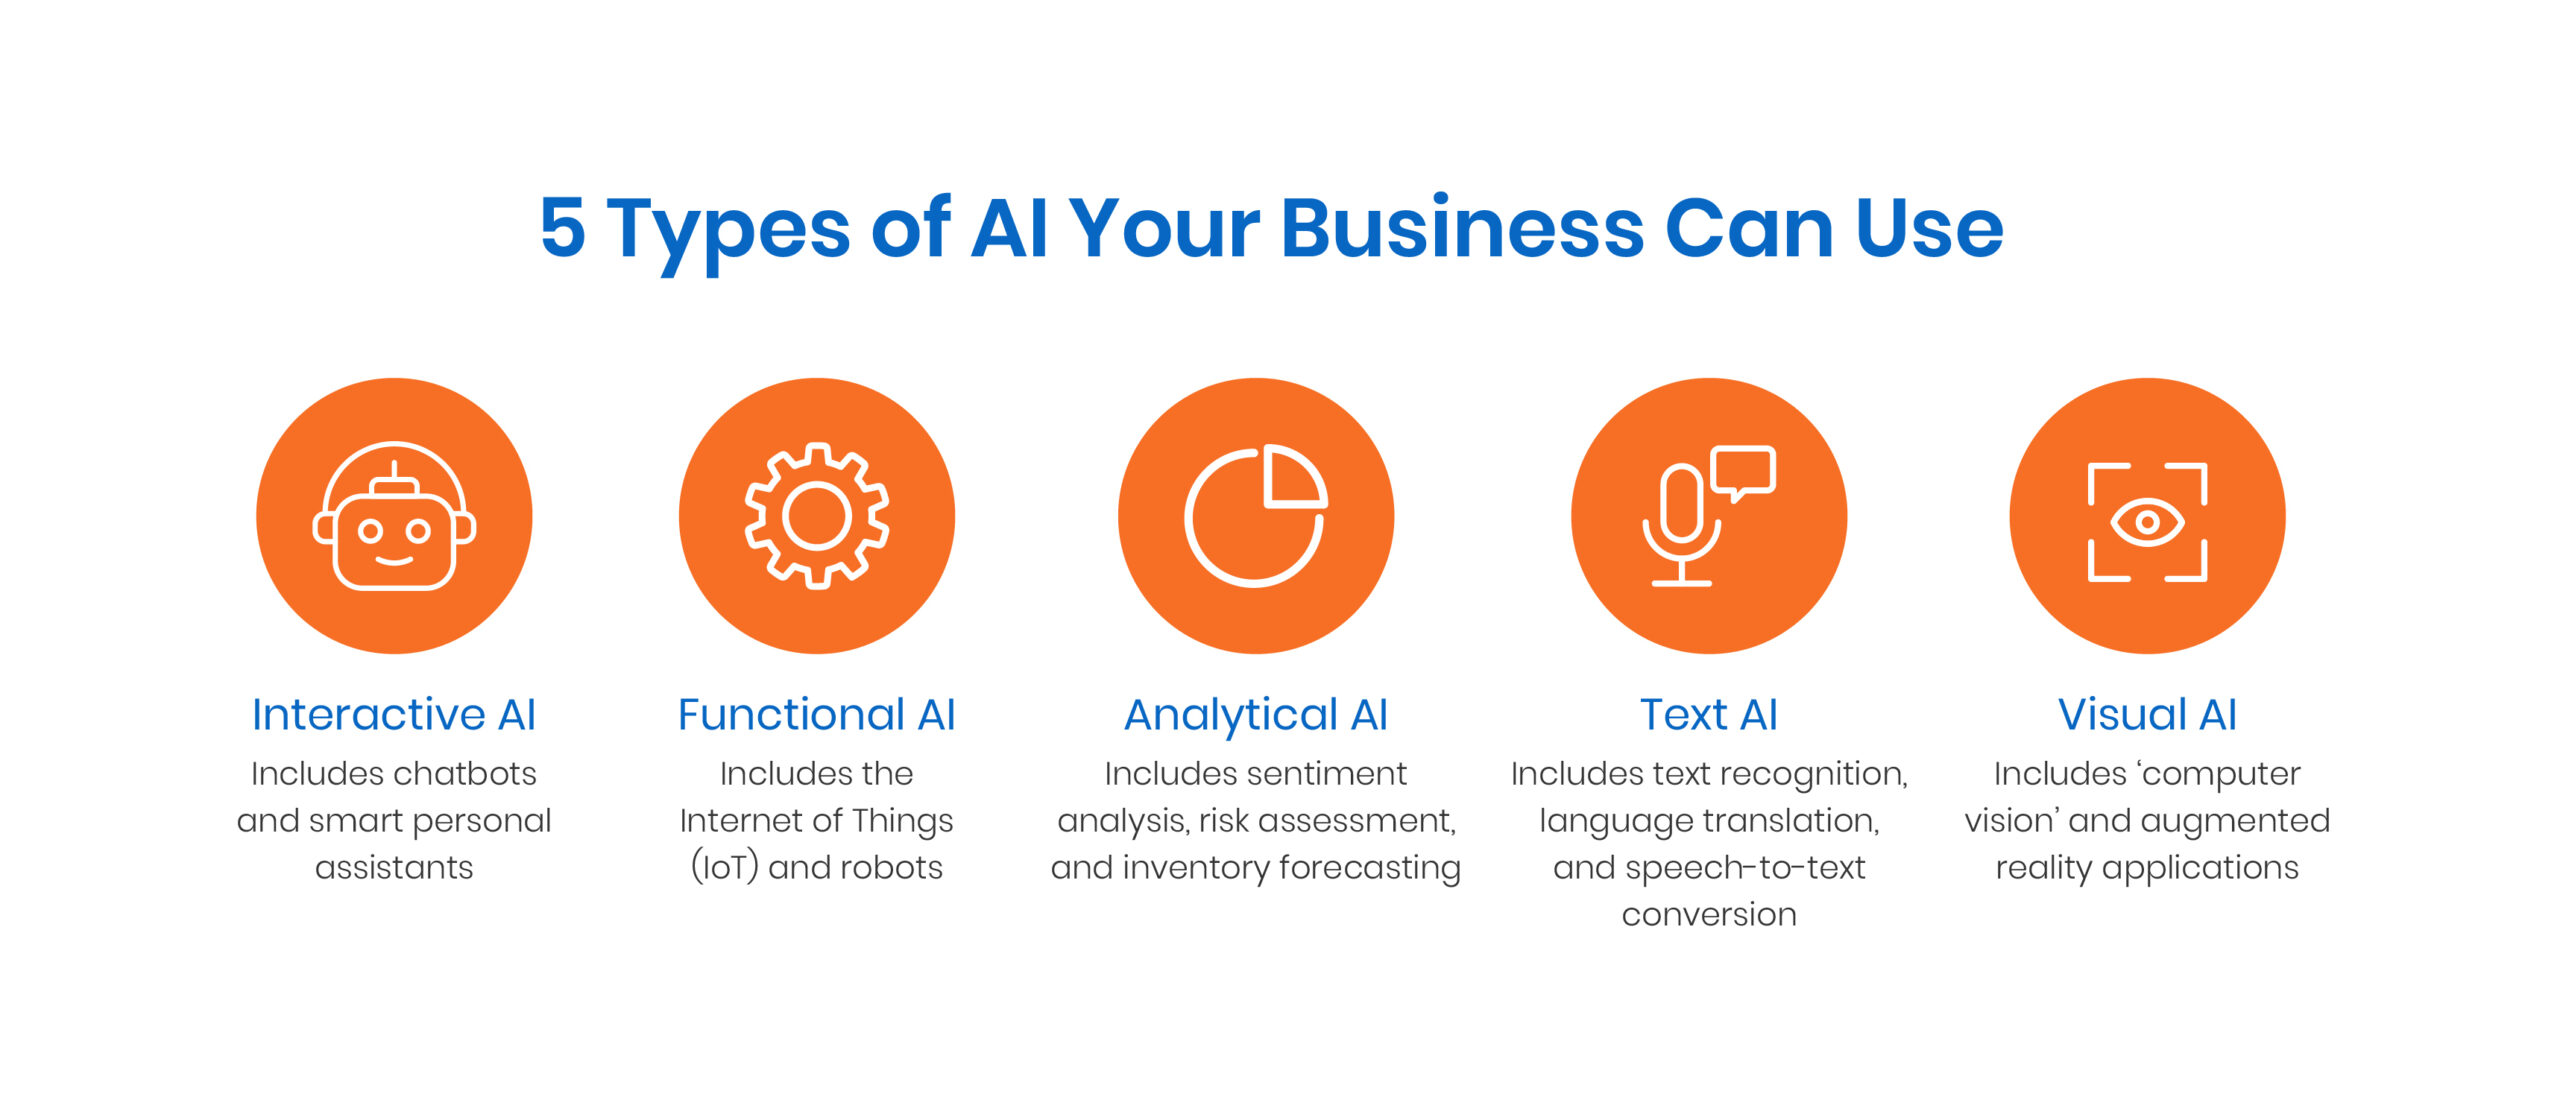 5 Types of AI Your Business Can Use 